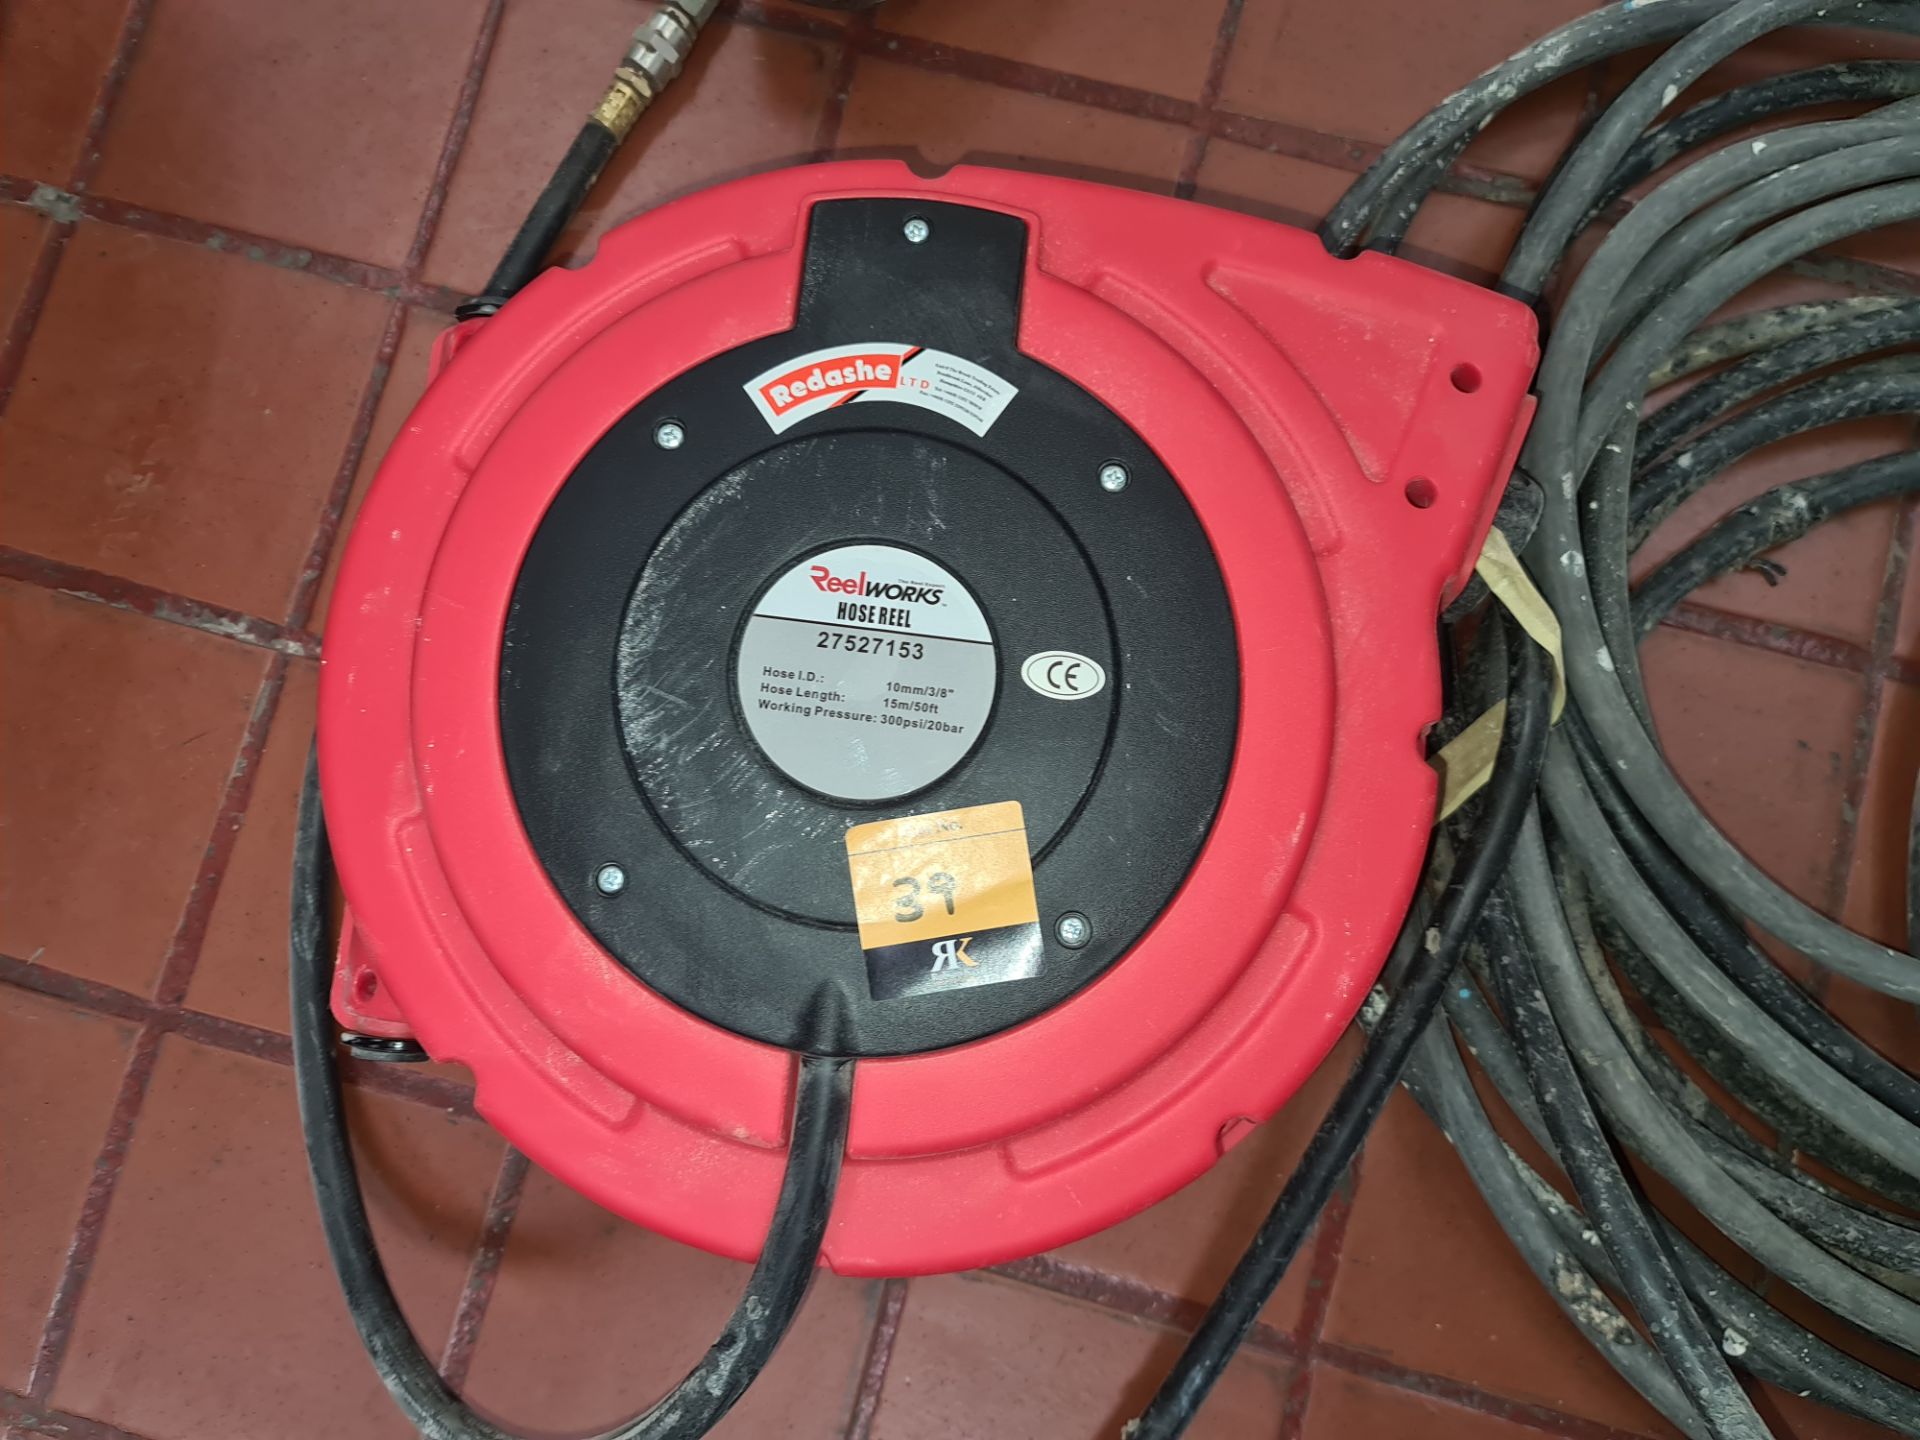 Redashe Reelworks hose reel air hose reel with 15m hose. This lot also includes quantity of air hose - Image 2 of 6